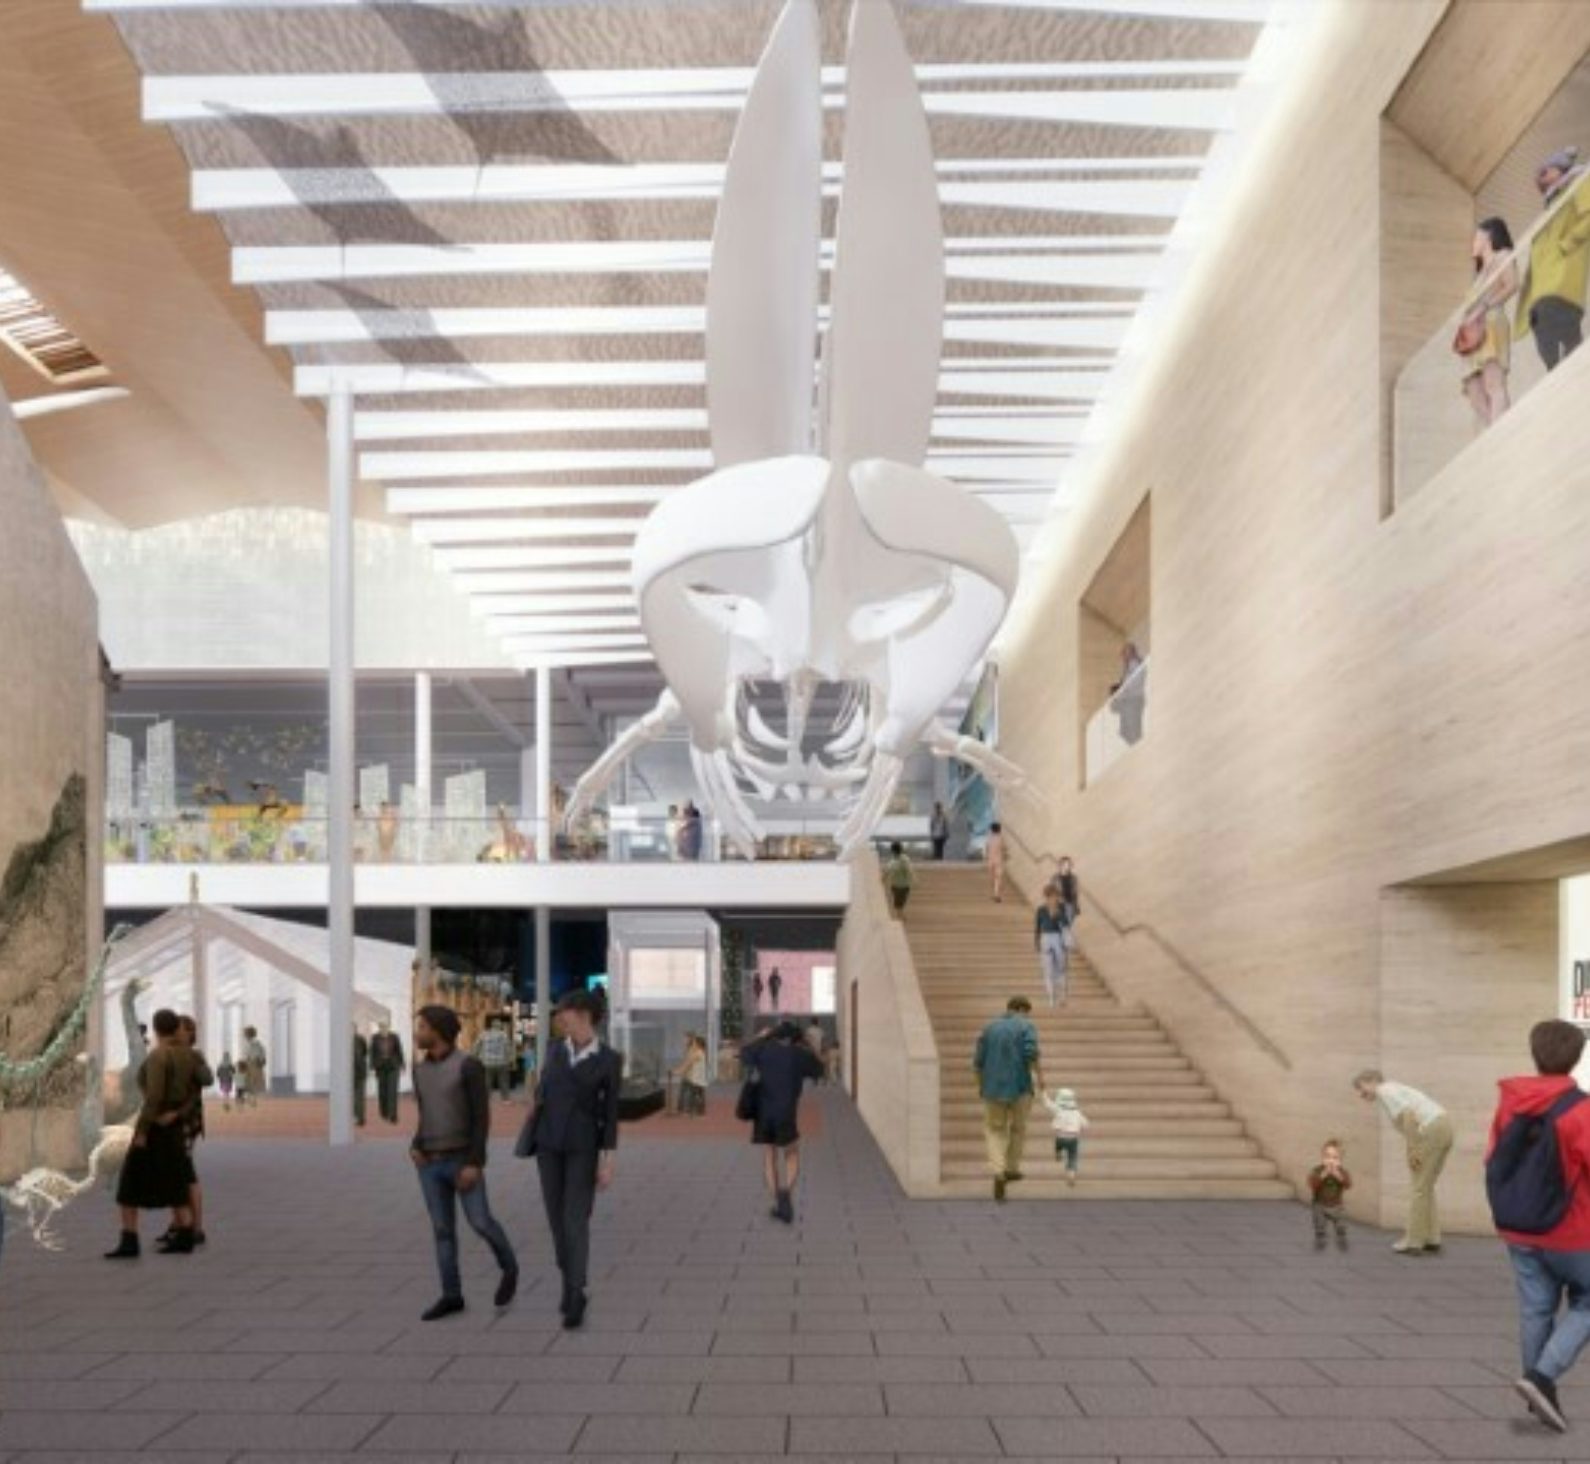 20 02 Canterbury Museum Preliminary Design Render Whale Atrium From Entry CR Credit Athfield Architects jpg Small